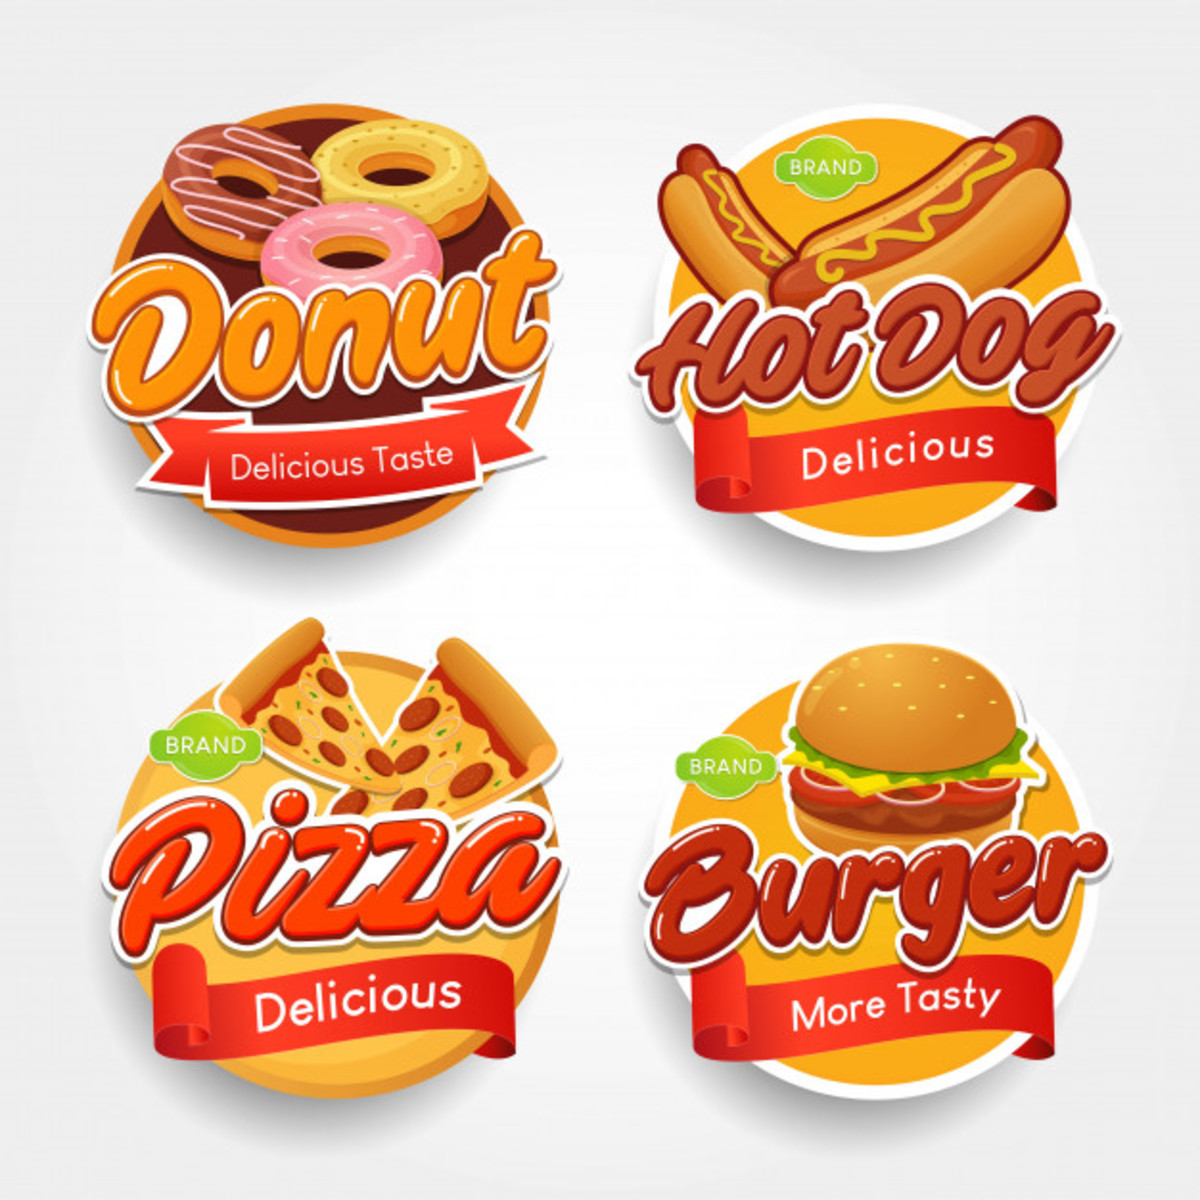 Logos of the Fast Food